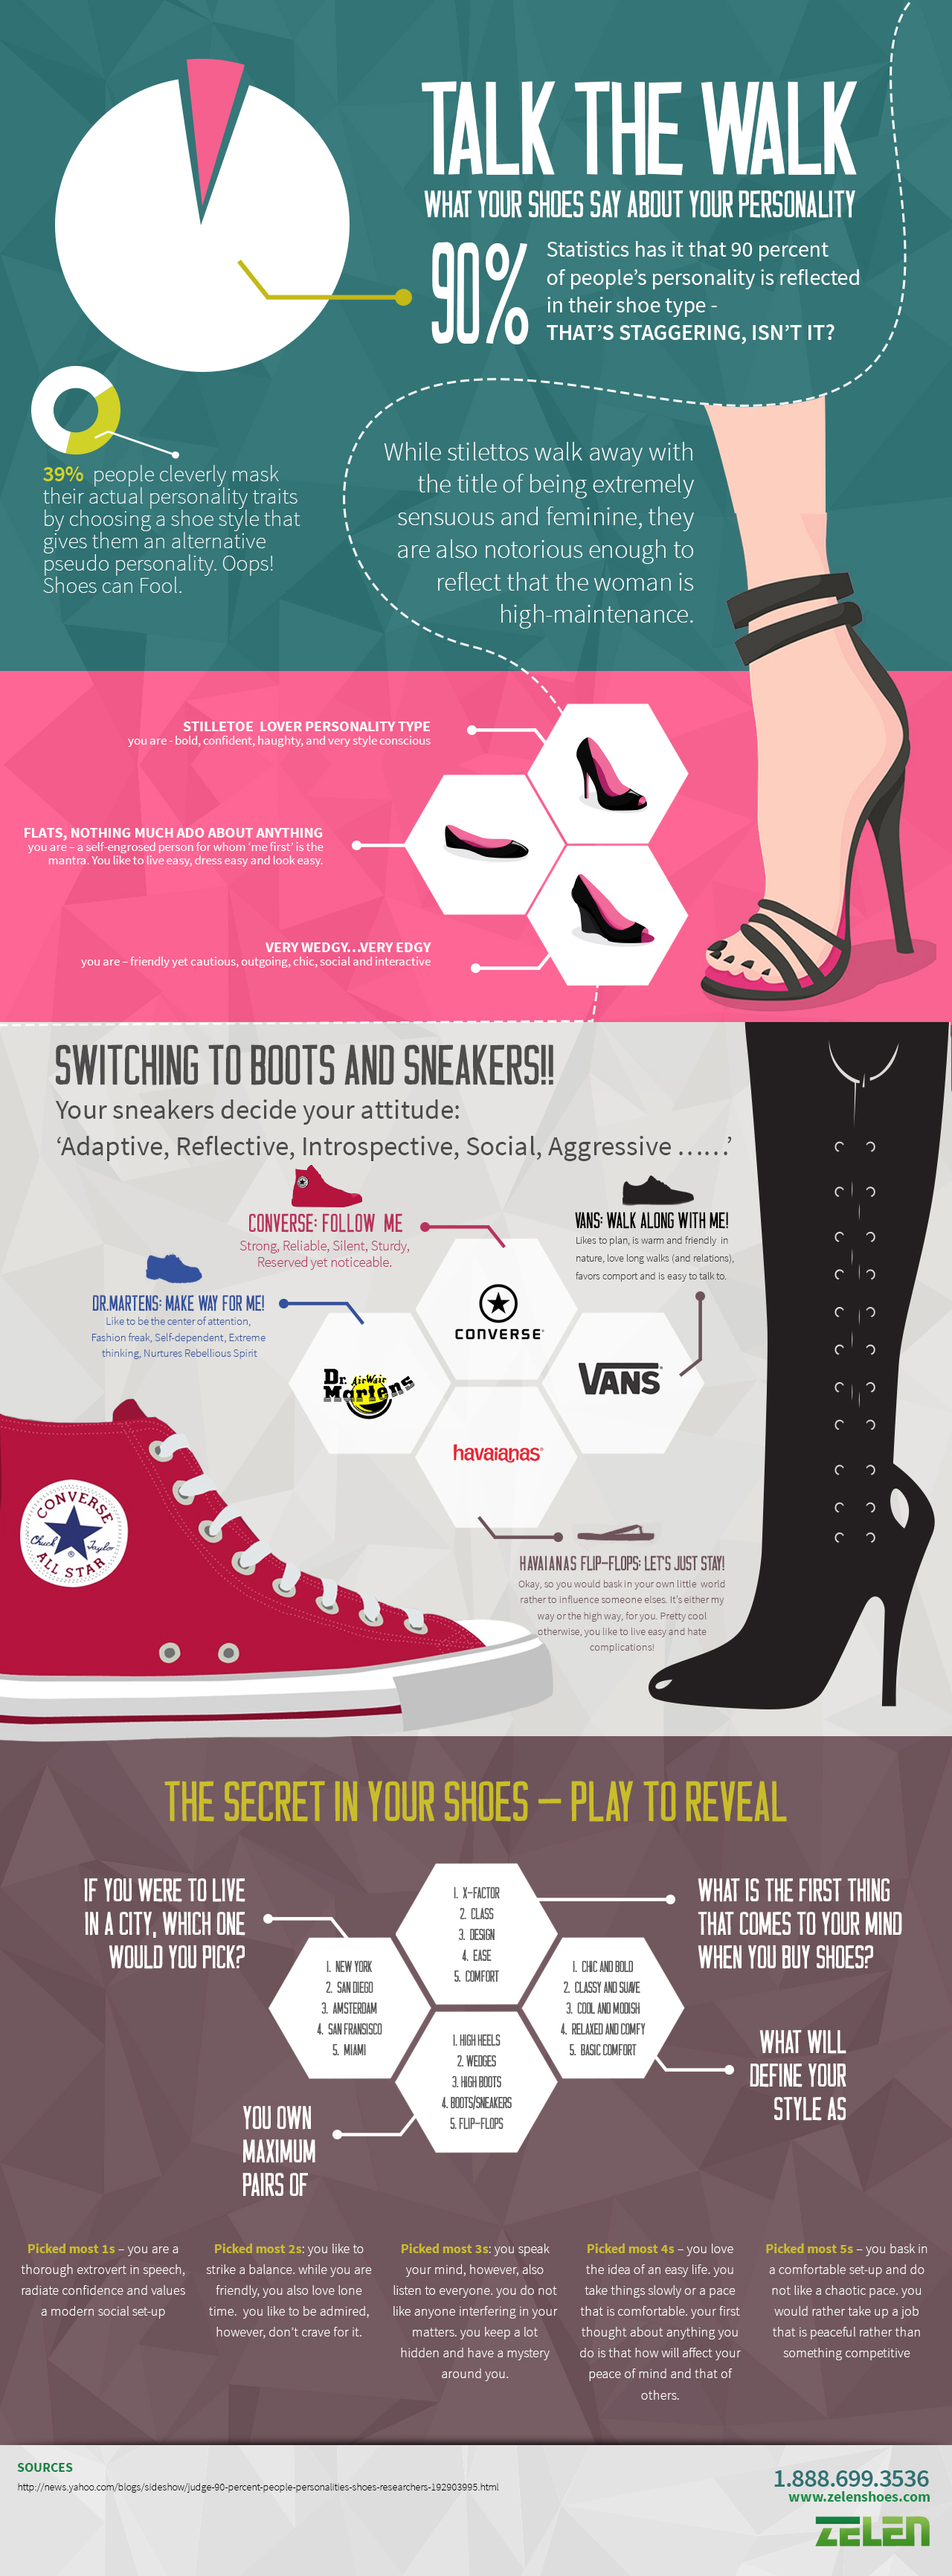 Talk the Walk: What Your Shoes Say about Your Personality